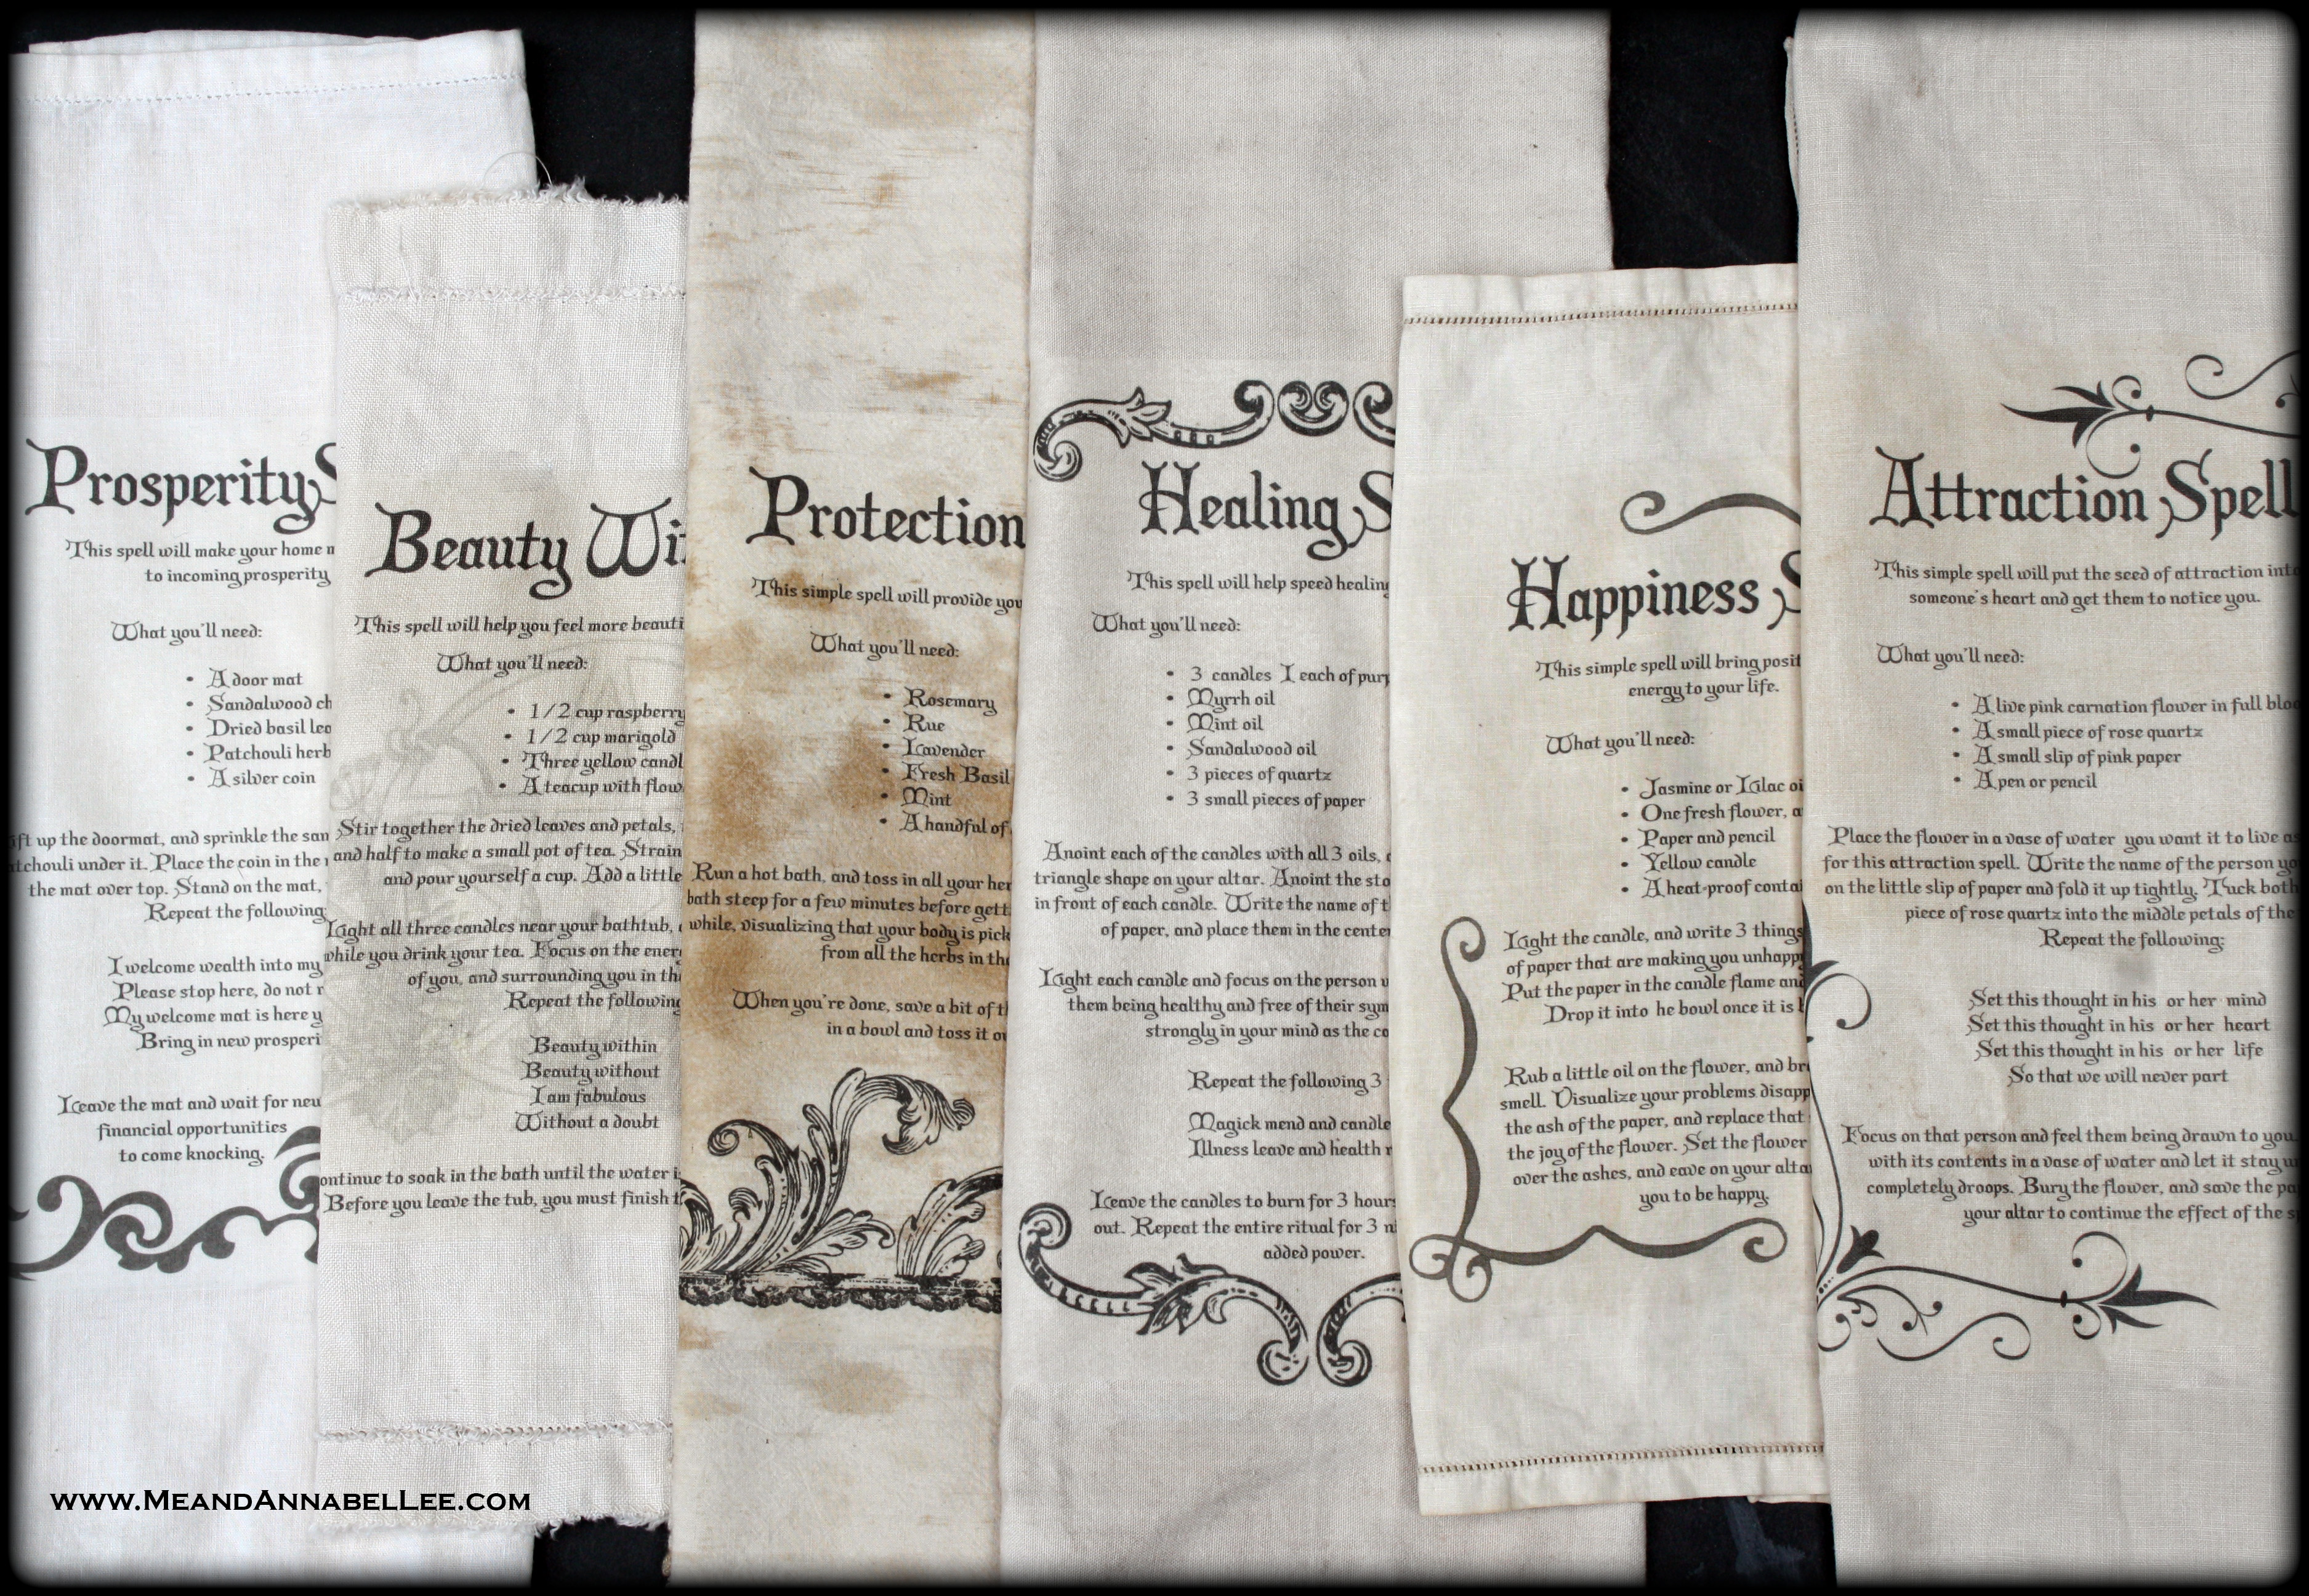 DIY Tea Stained Witches Spell Napkins | How to Tea Stain with Coffee Grounds | Halloween Crafts | Image Transfer Tutorial |Samhain | www.MeandAnnabelLee.com